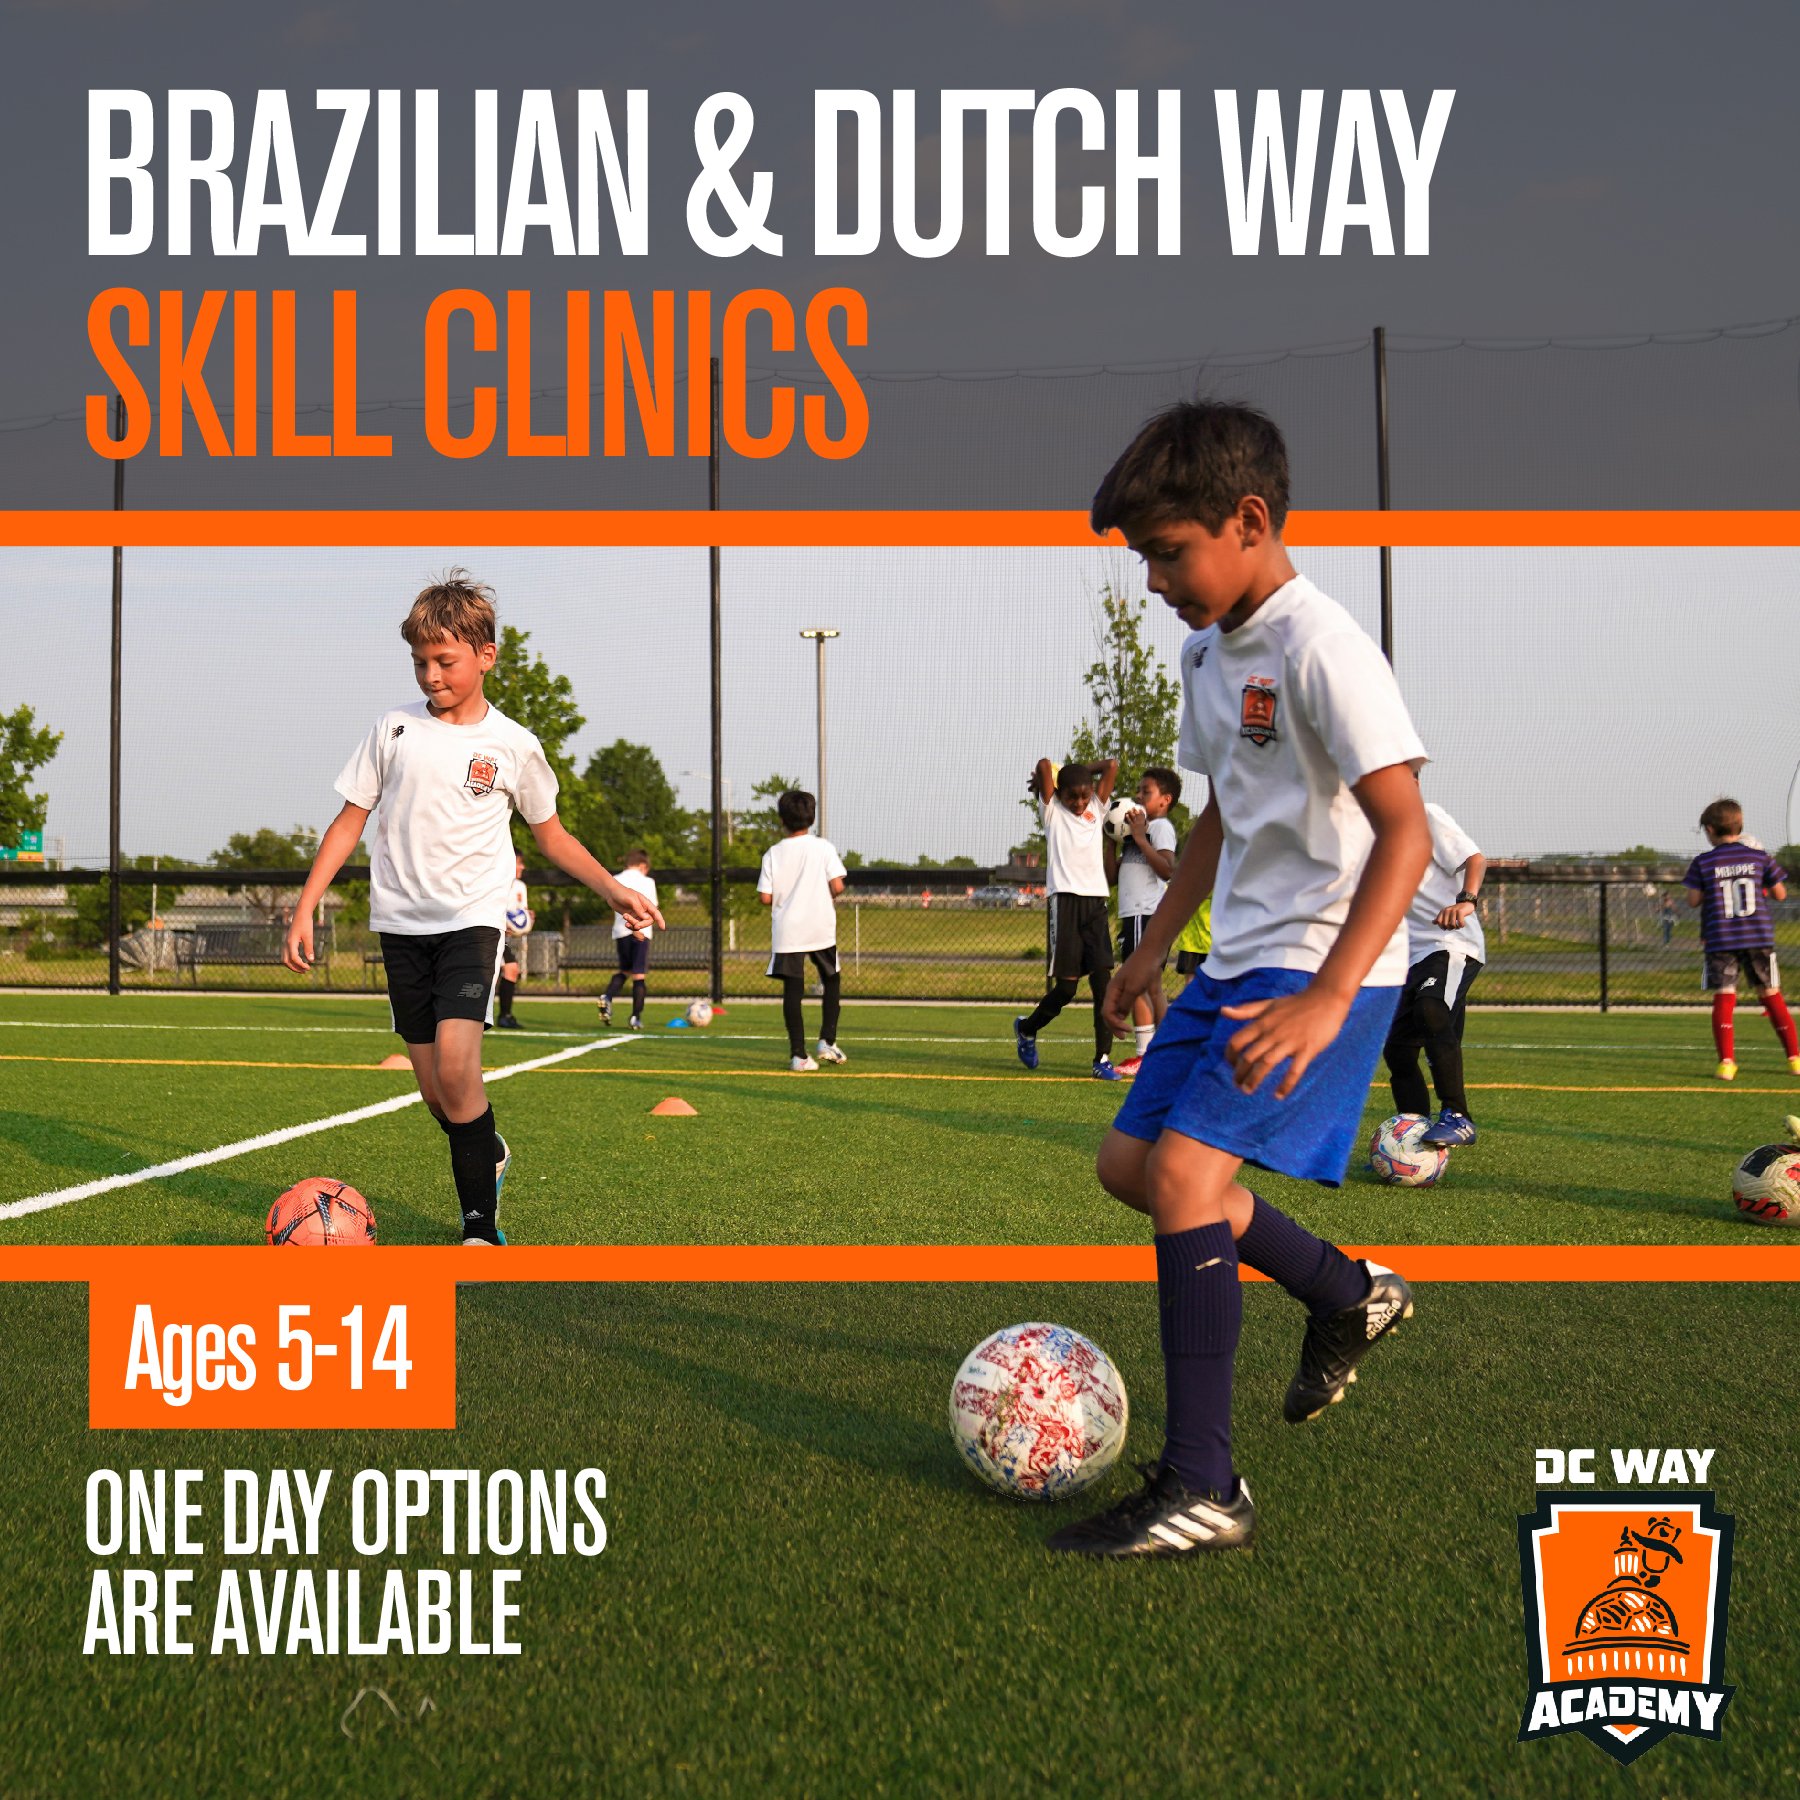 Want to take your skills to the next level? 💪 Get ready to experience the best of Brazilian and Dutch soccer techniques at our Skills Clinics! 🇧🇷⚽🇳🇱
 
Whether you're honing your dribbling like Neymar or mastering precision passing like Van Dijk,